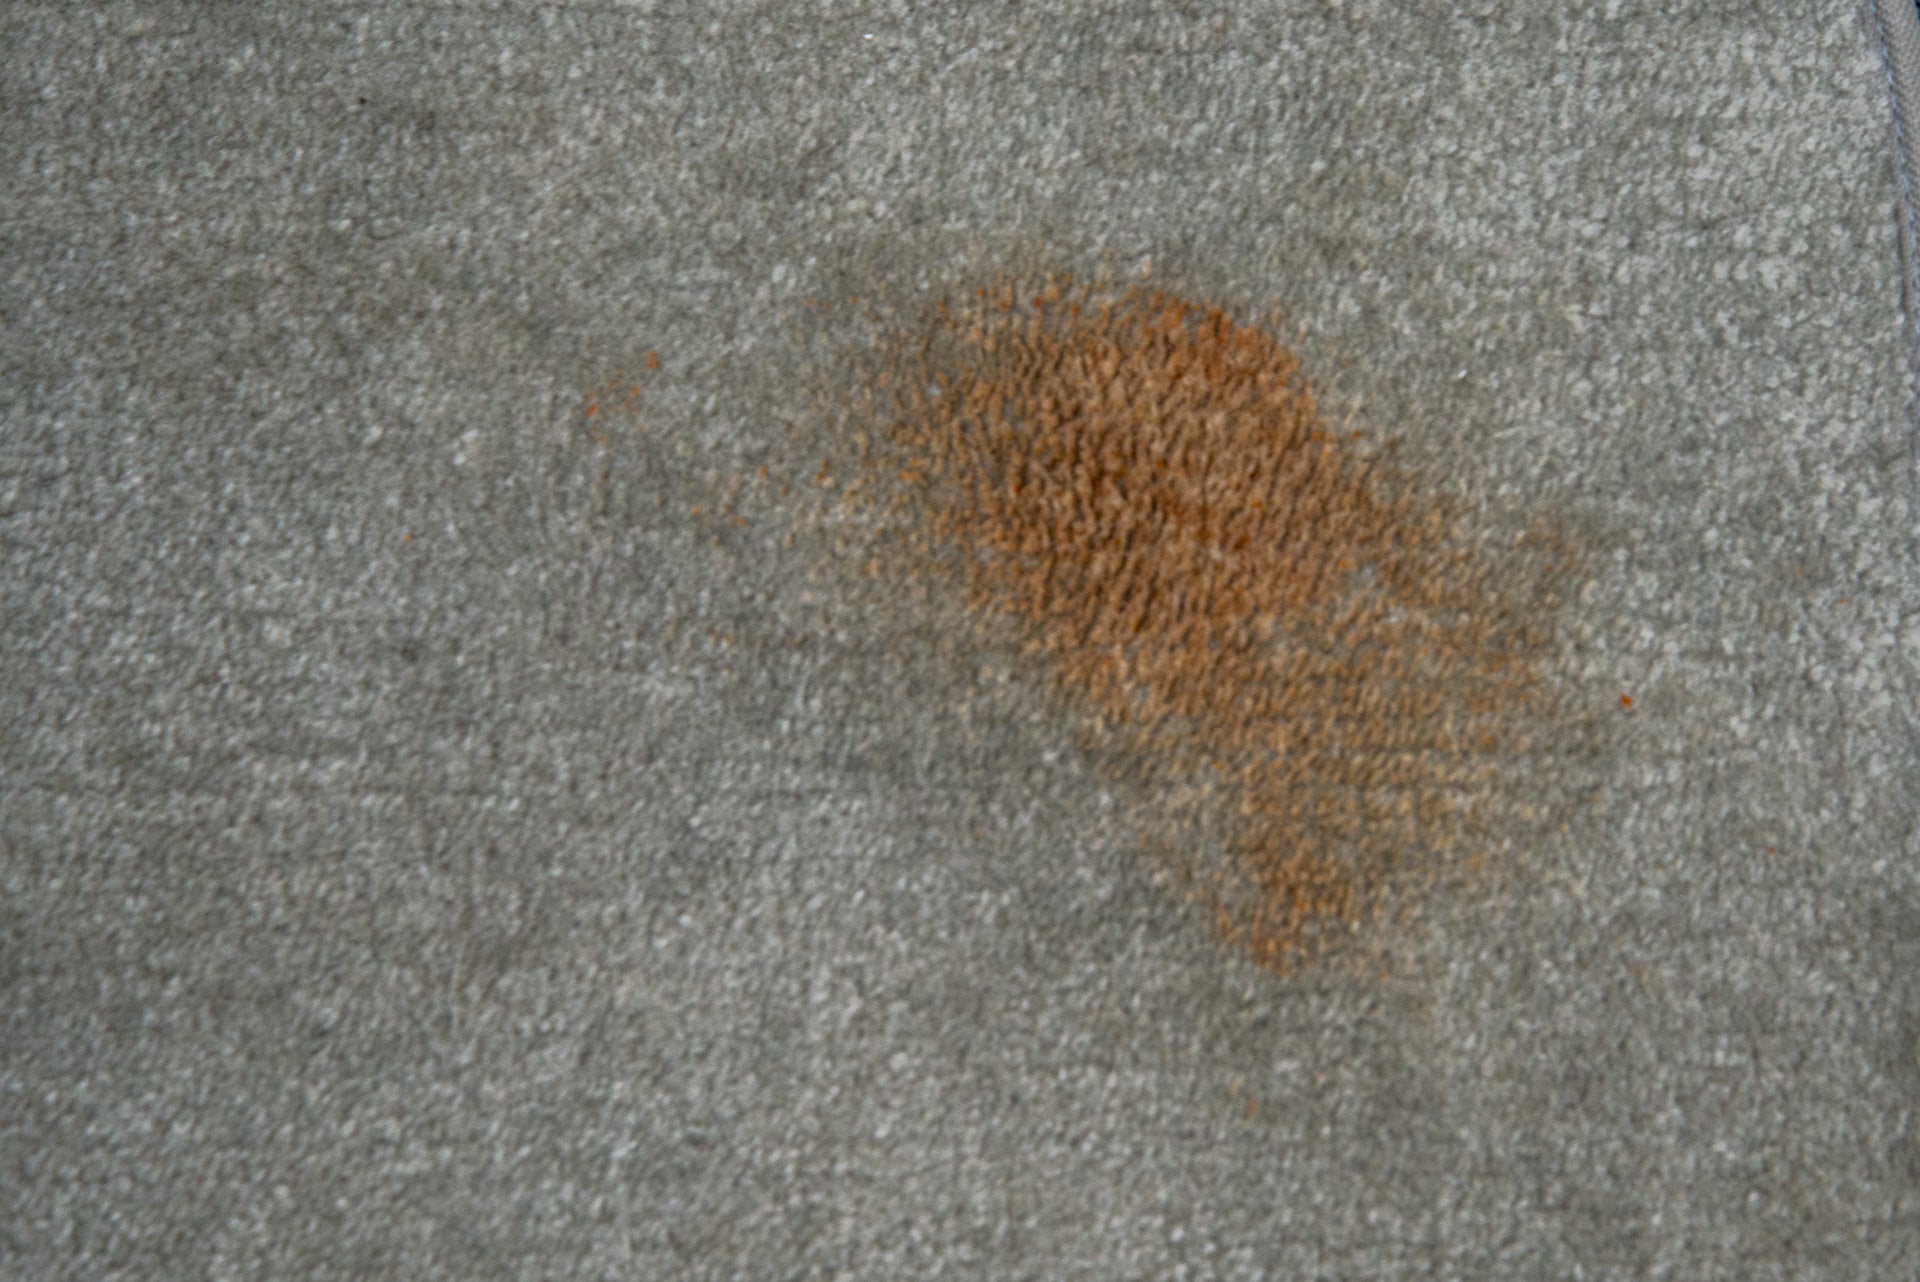 A ketchup stain on a carpet